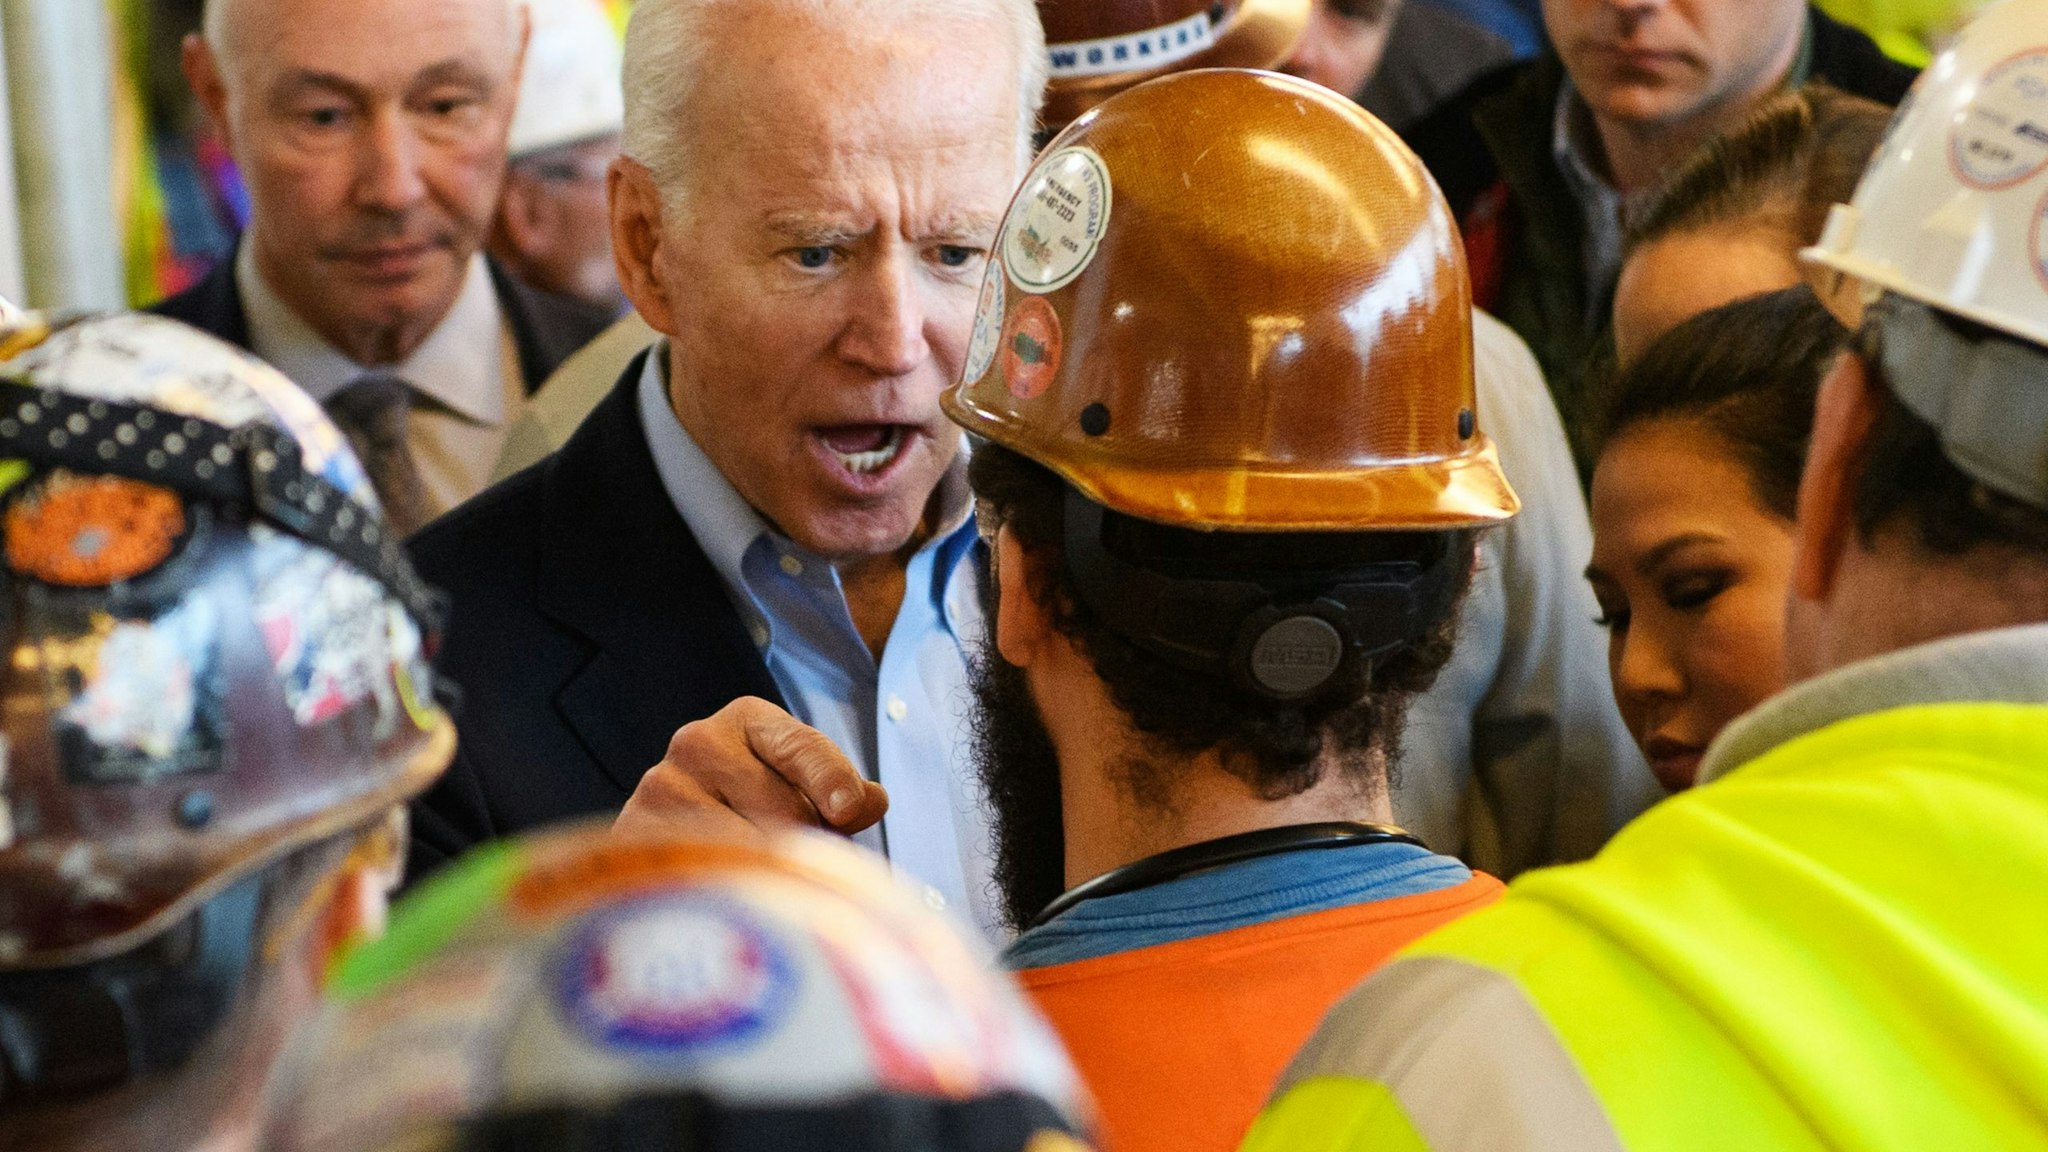 OPSHOT - Democratic presidential candidate Joe Biden has heated exchange meets workers and discusses gun rights as he tours the Fiat Chrysler plant in Detroit, Michigan on March 10, 2020. - Biden opened primary day meeting workers at an under-construction automobile plant in Detroit, where he received cheers but also was confronted by one worker. In an exchange avidly shared online by Trump supporters, the worker, wearing a construction helmet and reflective vest, accused Biden of seeking to weaken the constitutional right to own firearms. "You're full of shit," Biden shot back. "I support the Second Amendment." When the worker pressed the issue, Biden, visibly agitated and with a raised voice, said "I'm not taking your gun away," adding, "Gimme a break, man." (Photo by MANDEL NGAN / AFP) (Photo by MANDEL NGAN/AFP via Getty Images)